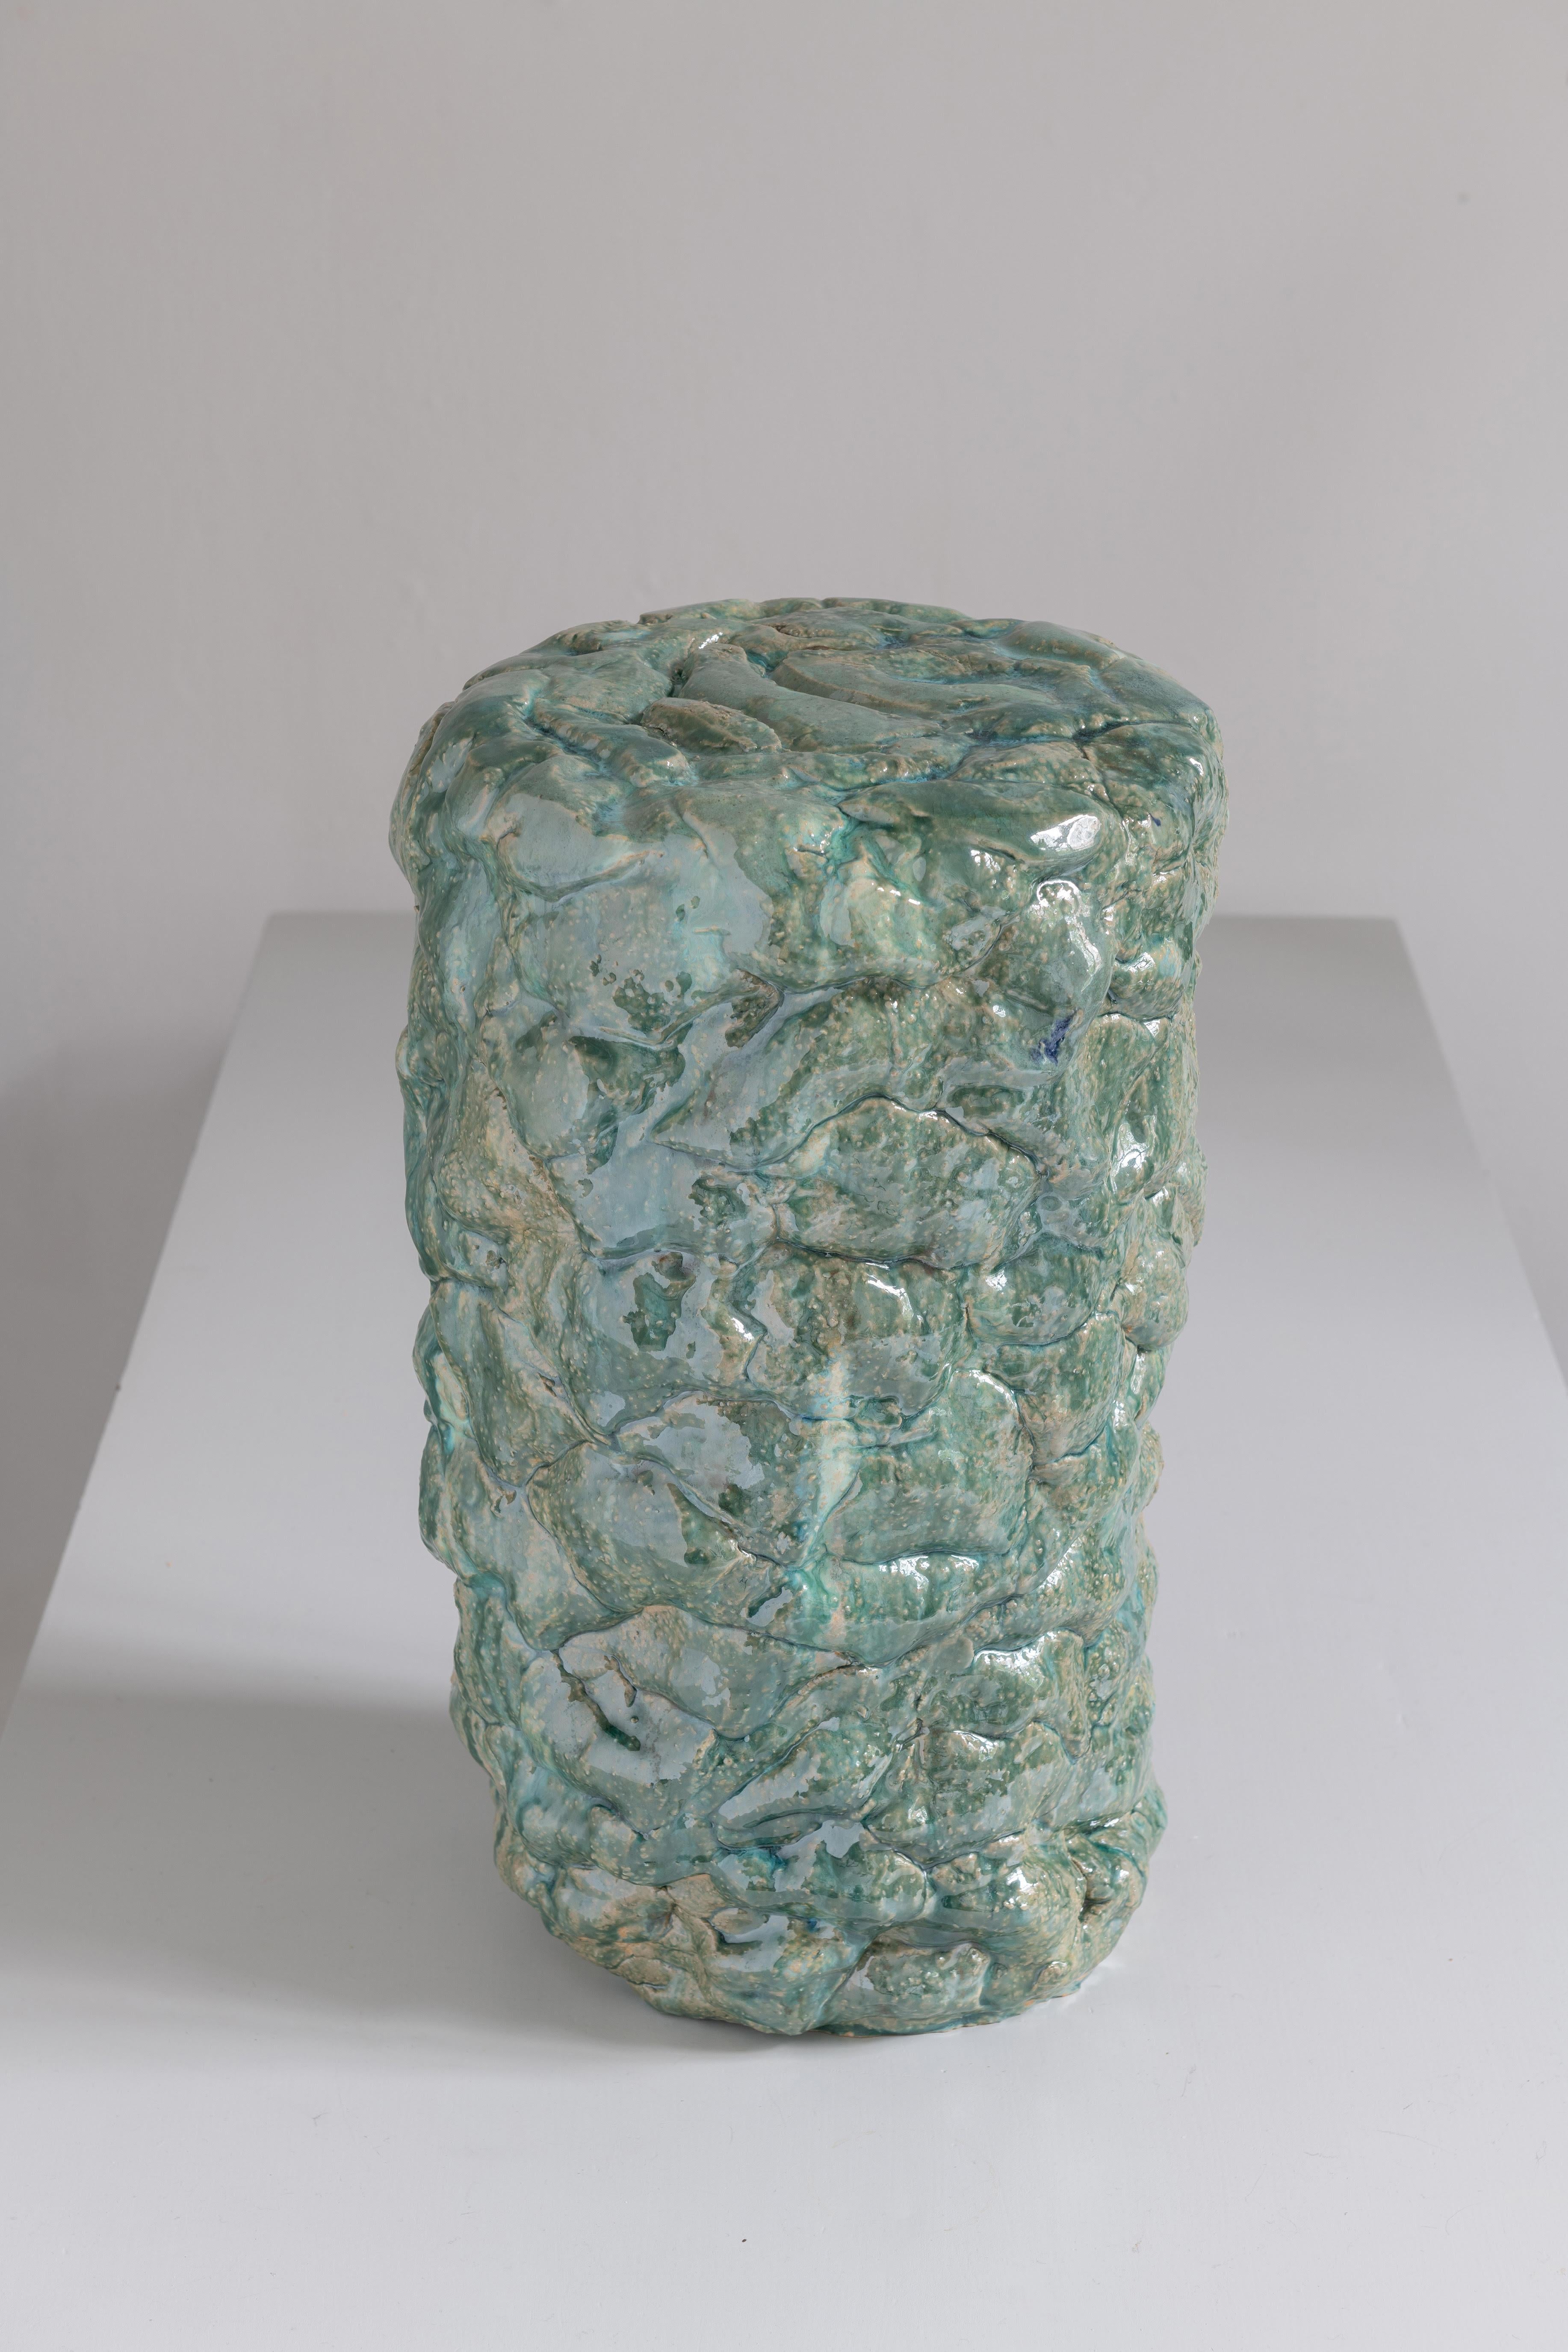 Jade sidechair by Natasja Alers, 2021
Dimensions: 42 x 30 cm
Material: ceramics, glazes

Visual artist Natasja Alers (The Hague, 1987) graduated from the Gerrit Rietveld Academy in the field of ceramics. Alers makes casts of human body parts and